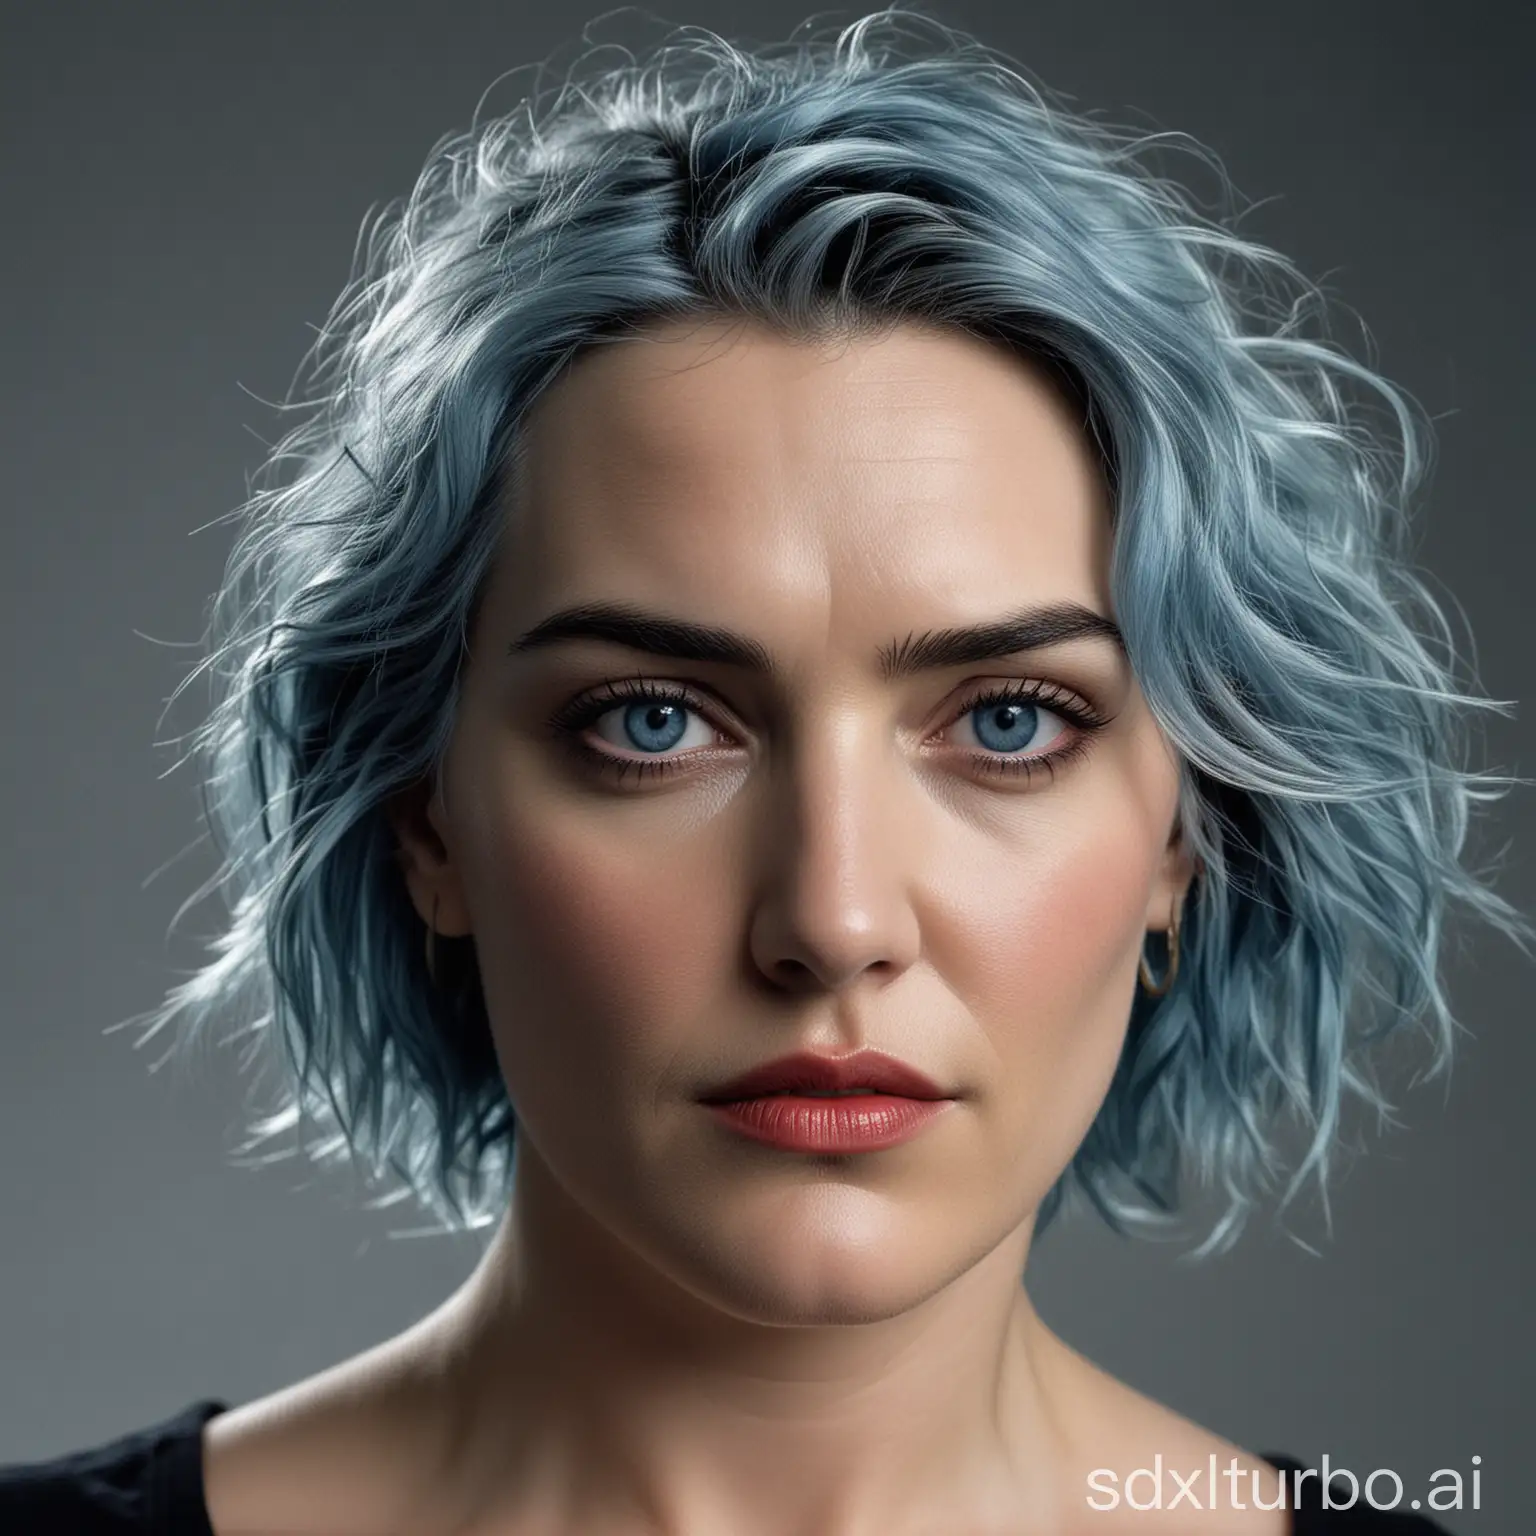 Portrait of Kate winslet, red eyes, blue hairs.